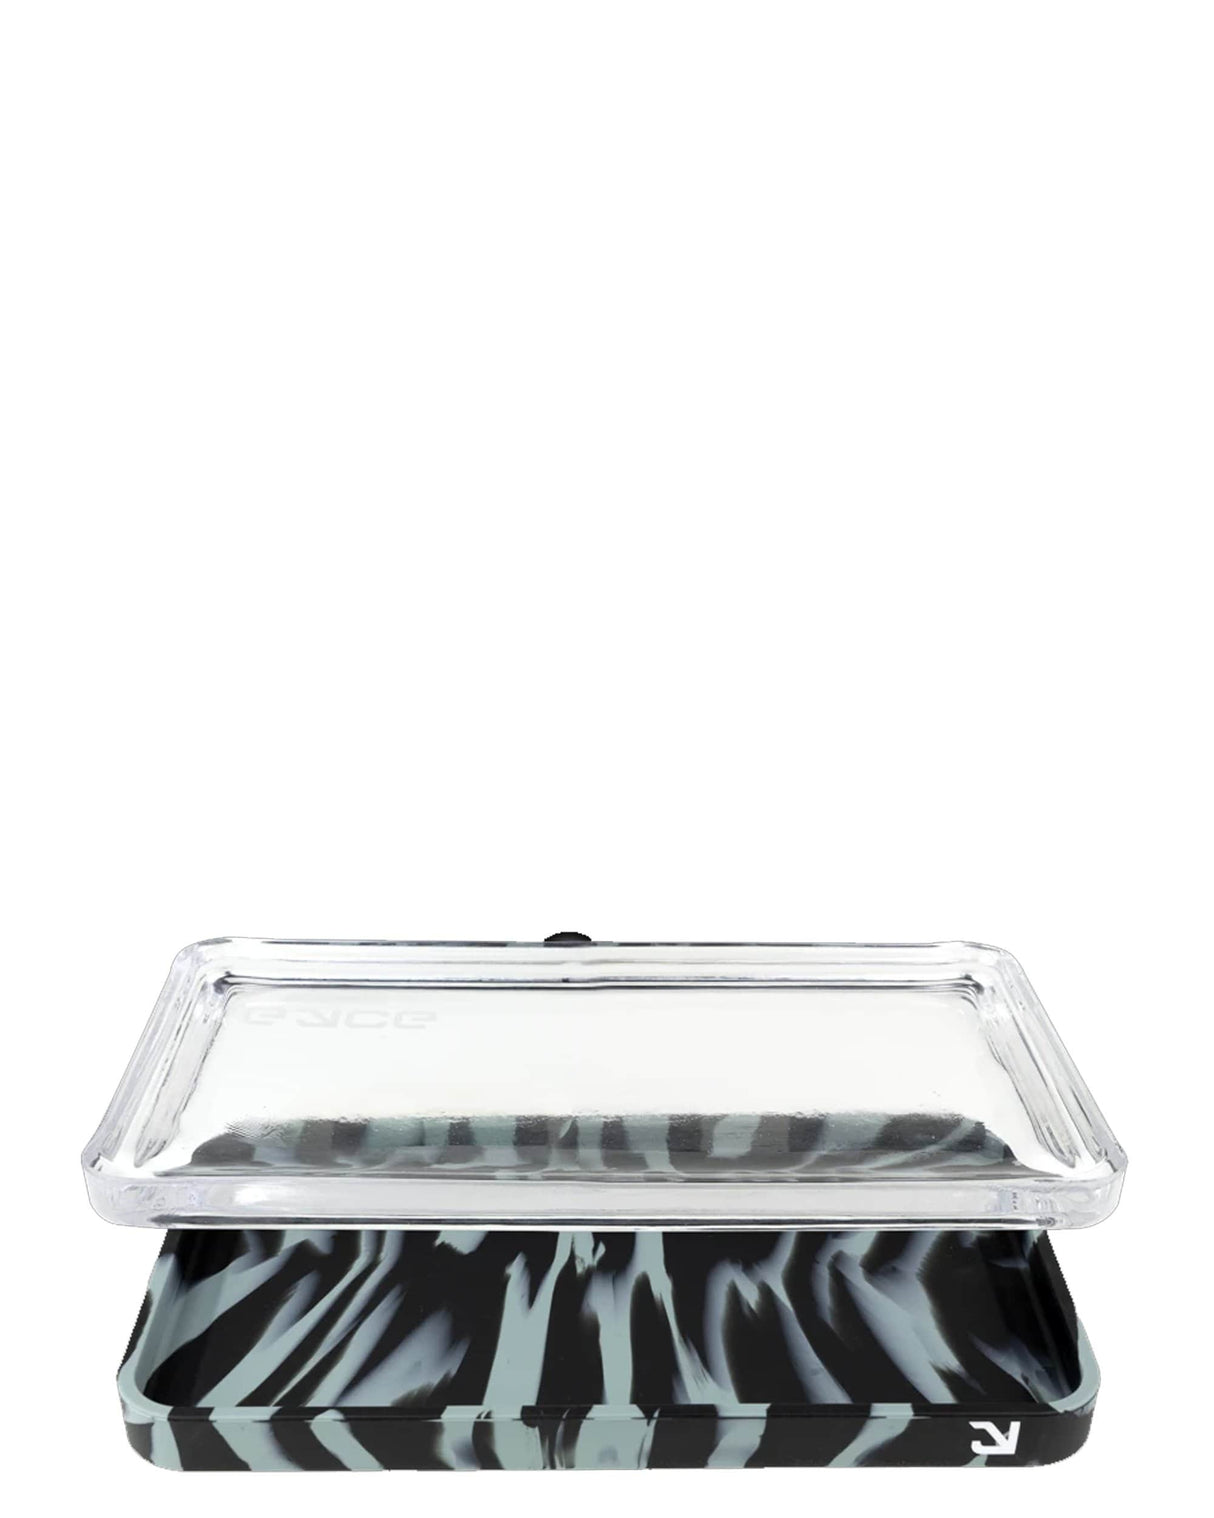 Eyce Silicone 2 in 1 Rolling Tray in Black Marble, Front View, Durable and Easy to Clean